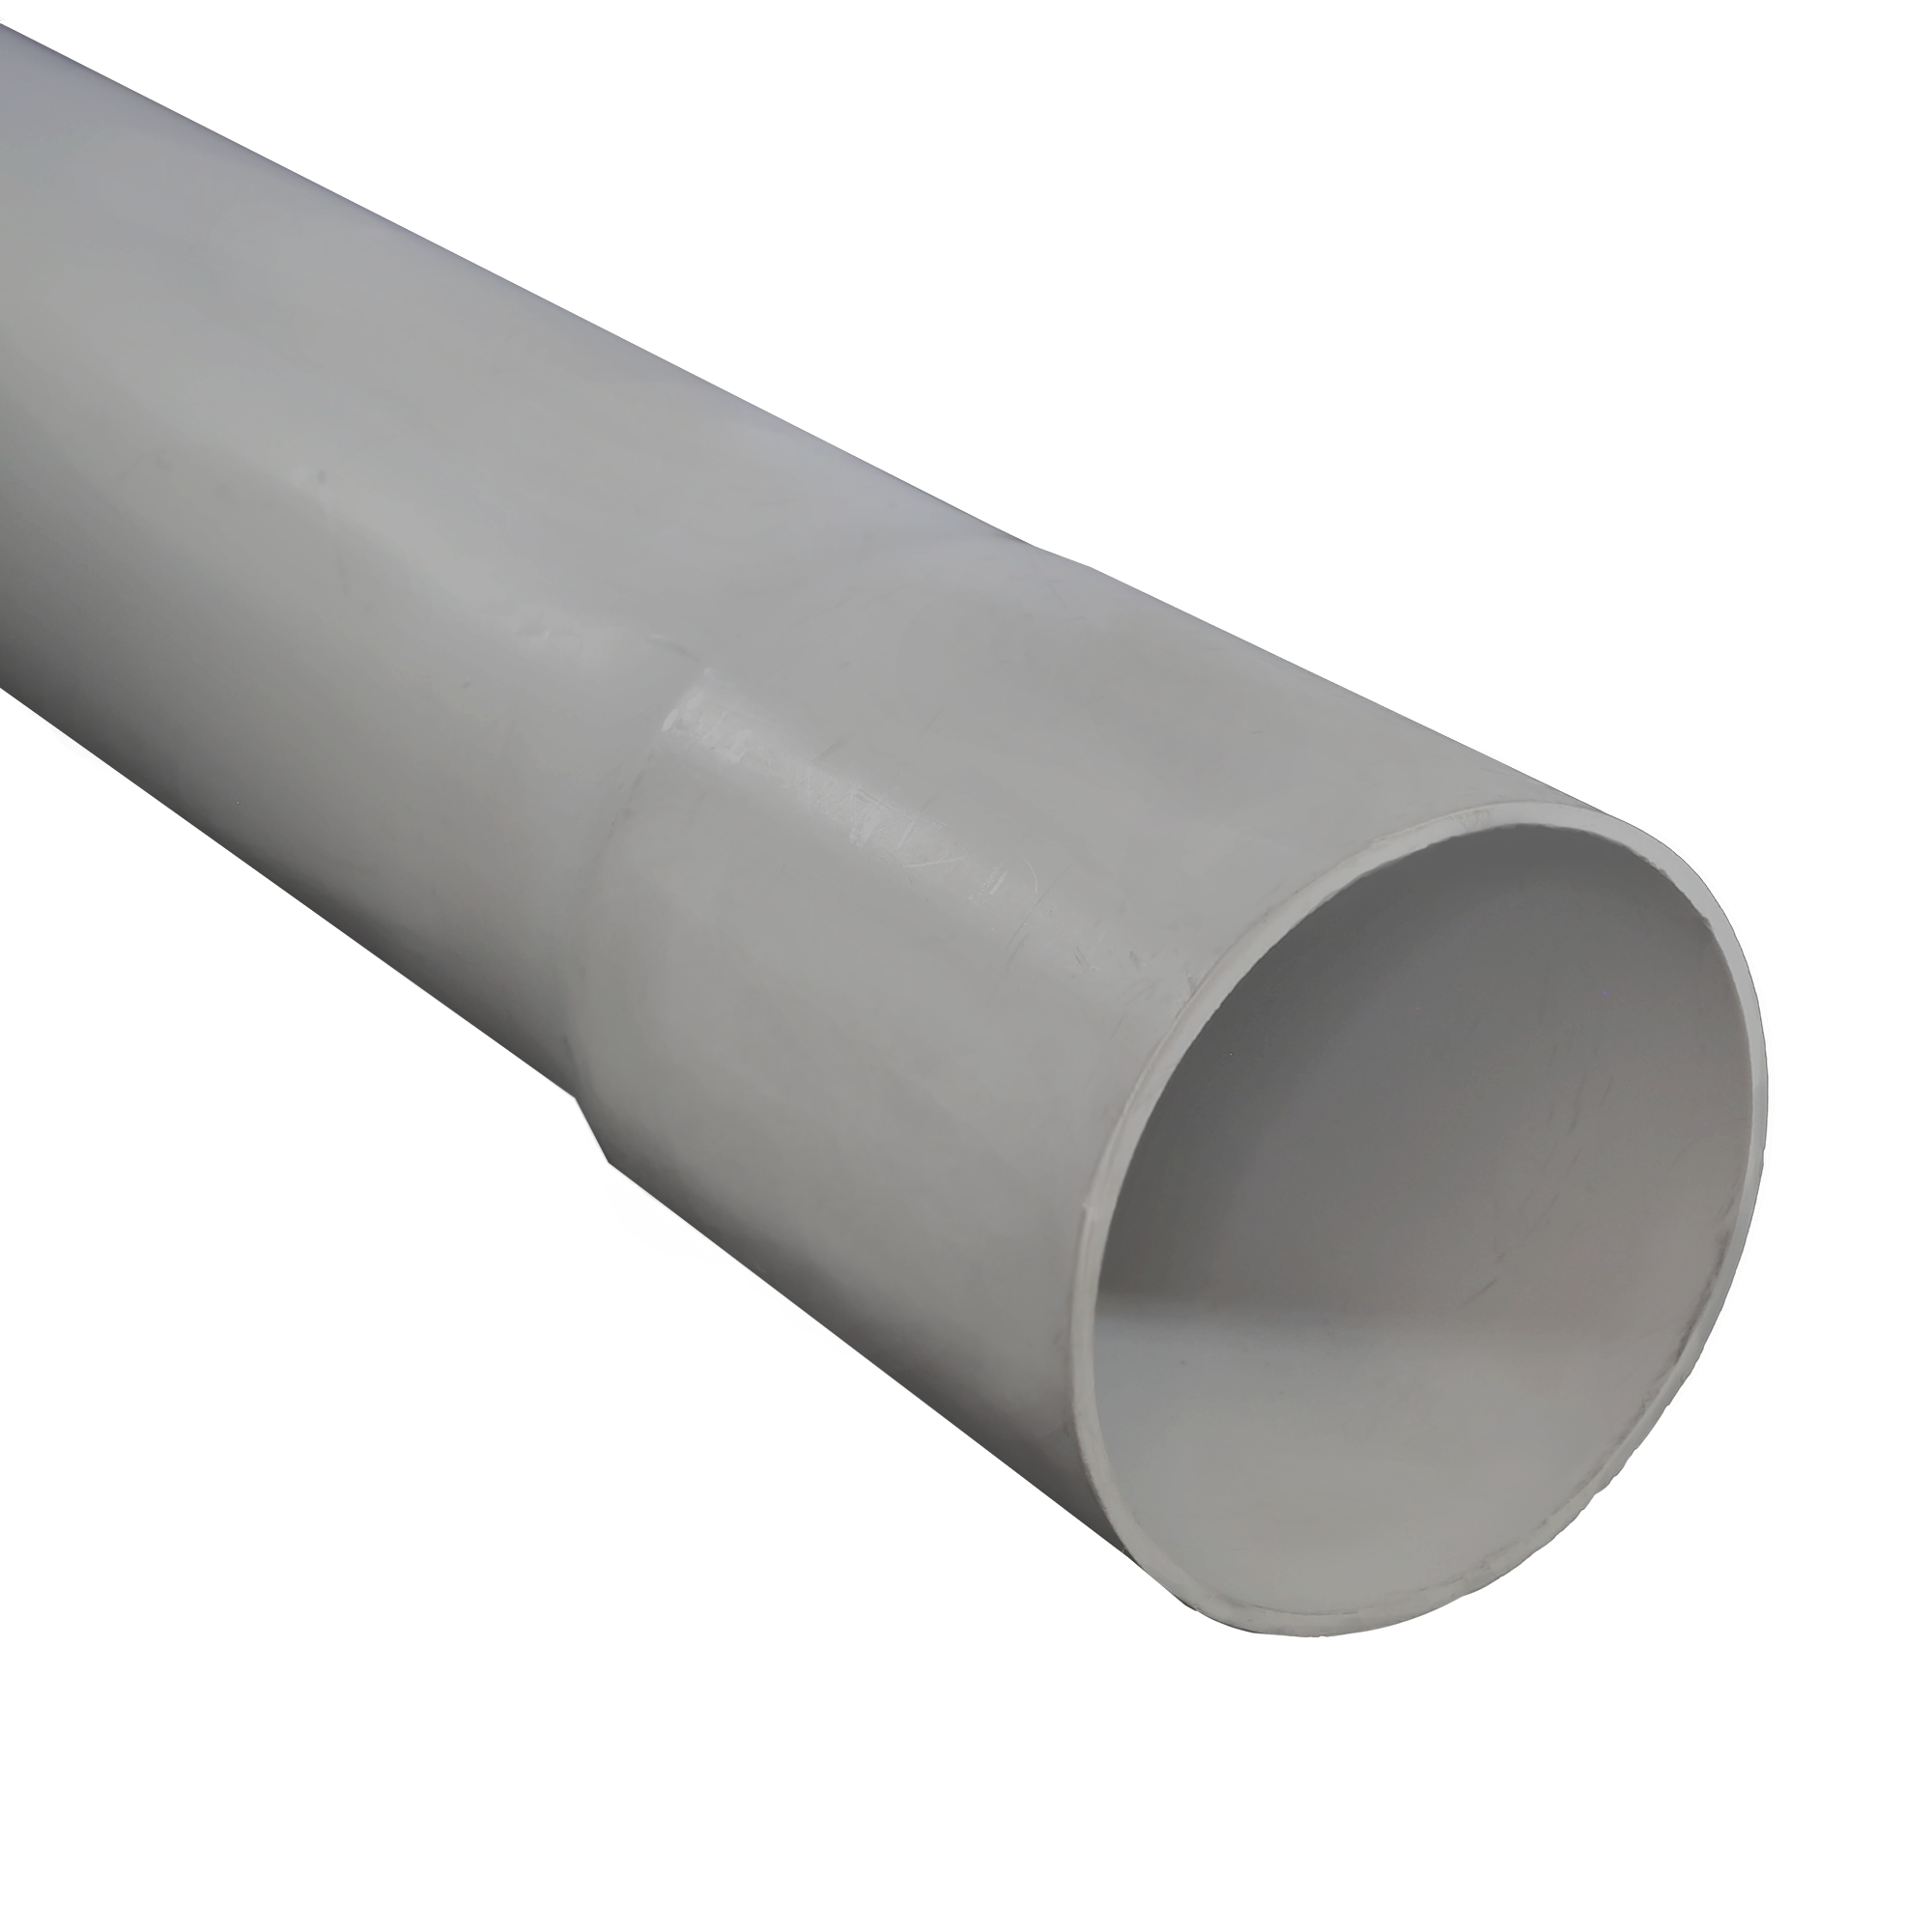 4 in. x 20 ft. EB-35 PVC Utility Duct